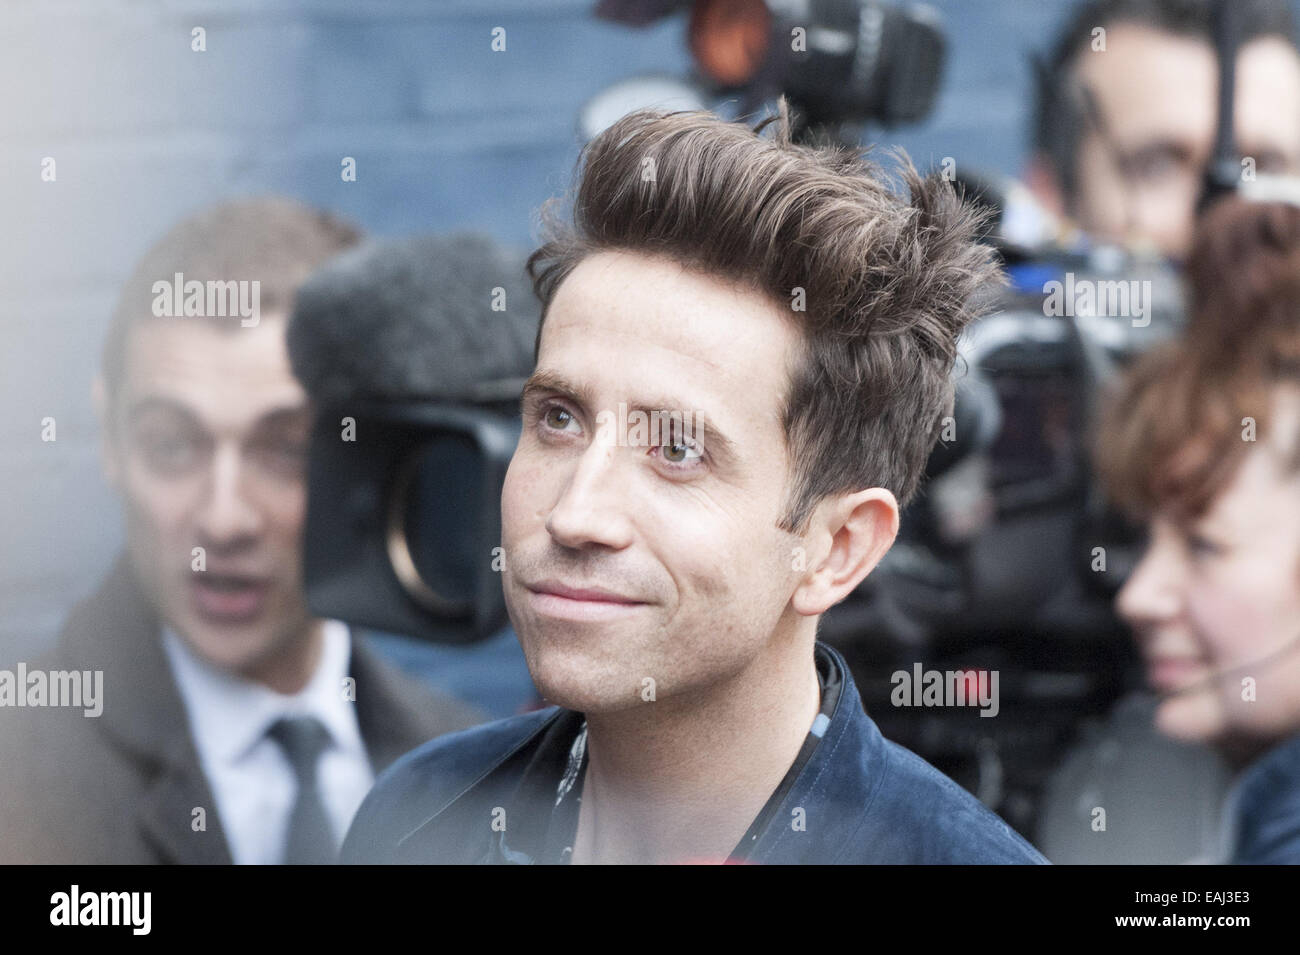 London, London, UK. 15th Nov, 2014. Artists arrive at Sarm Studios in Notting Hill, west London, to record Band Aid. Pictured: Nick Grimshaw. © ZUMA Press, Inc./Alamy Live News Stock Photo